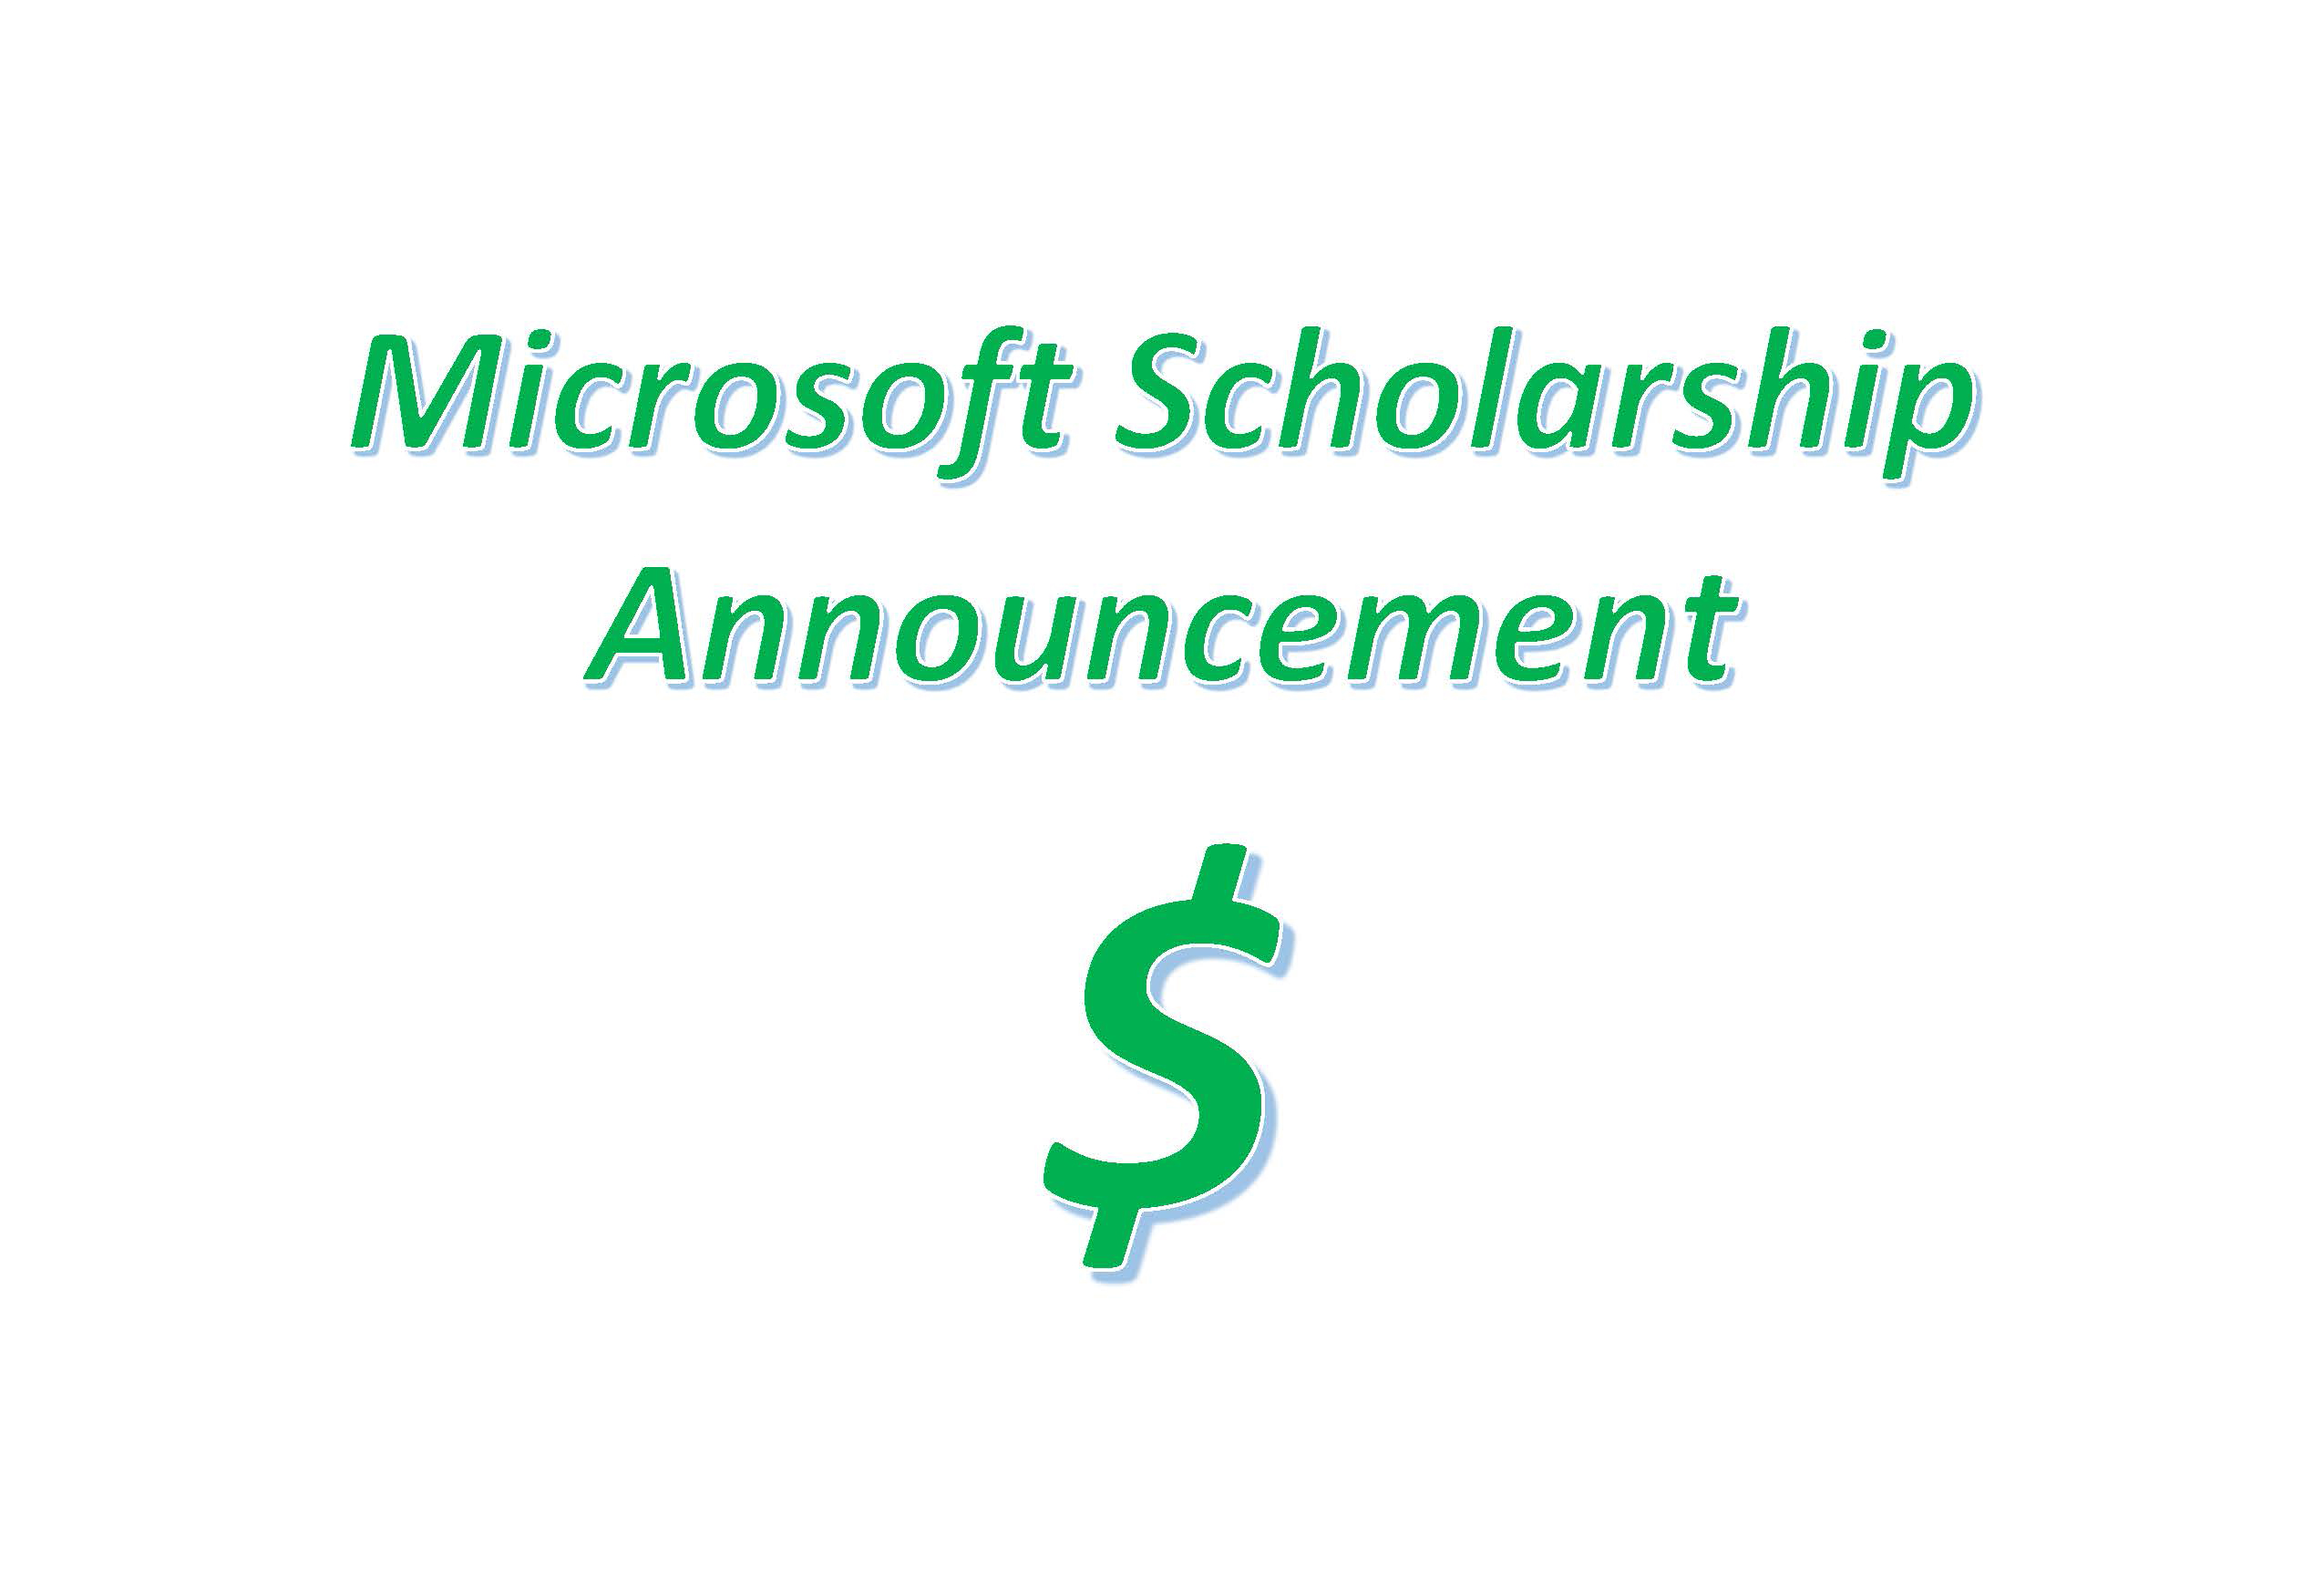 Microsoft Scholarship Opportunity Announced for Computer Engineering Majors